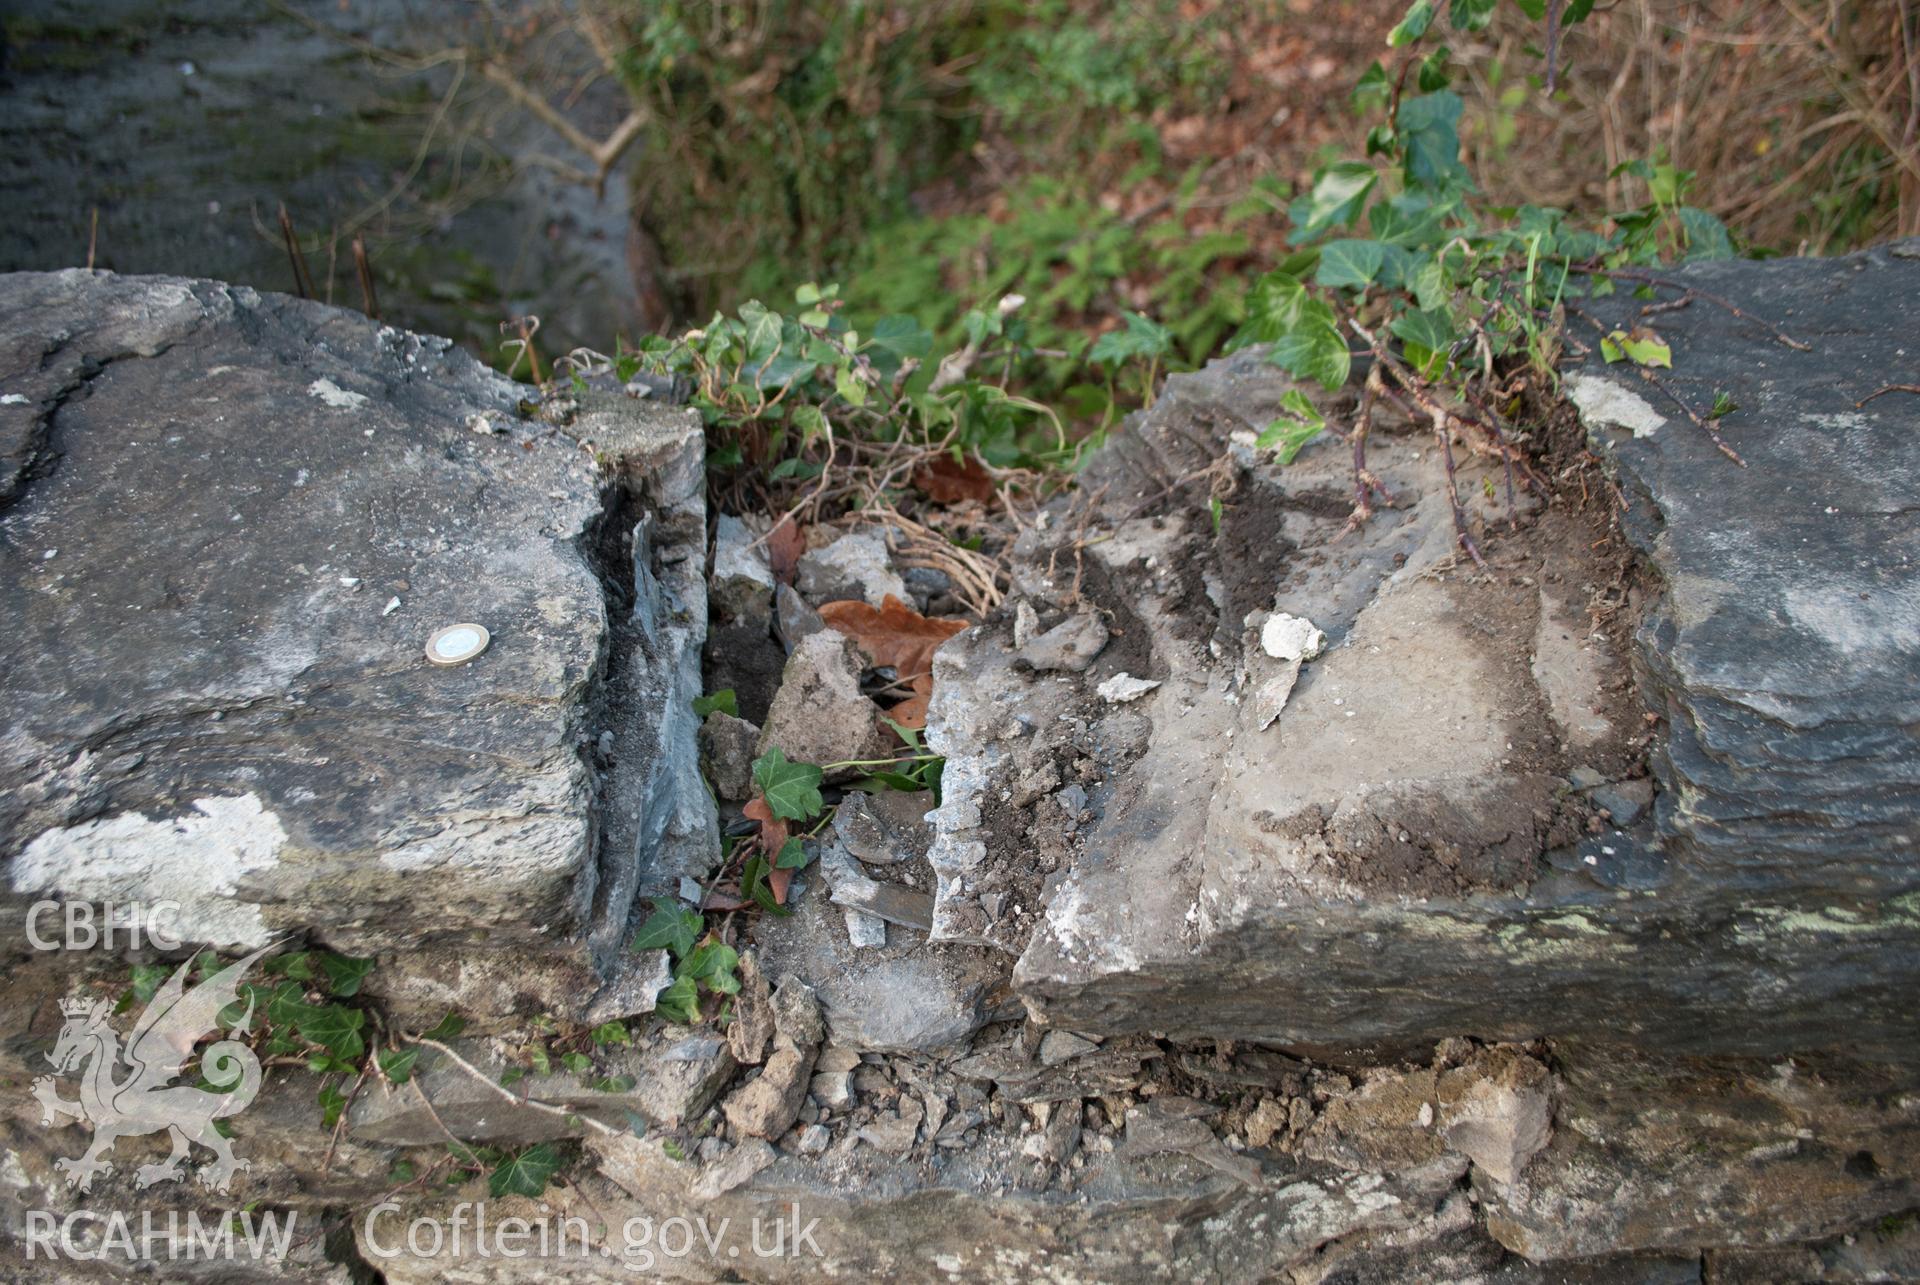 Area of damaged coping at the northwest end of the parapet. View from the north east. Digital photograph taken for Archaeological Watching Brief at Pont y Pair, Betws y Coed, 2019. Gwynedd Archaeological Trust Project no. G2587.